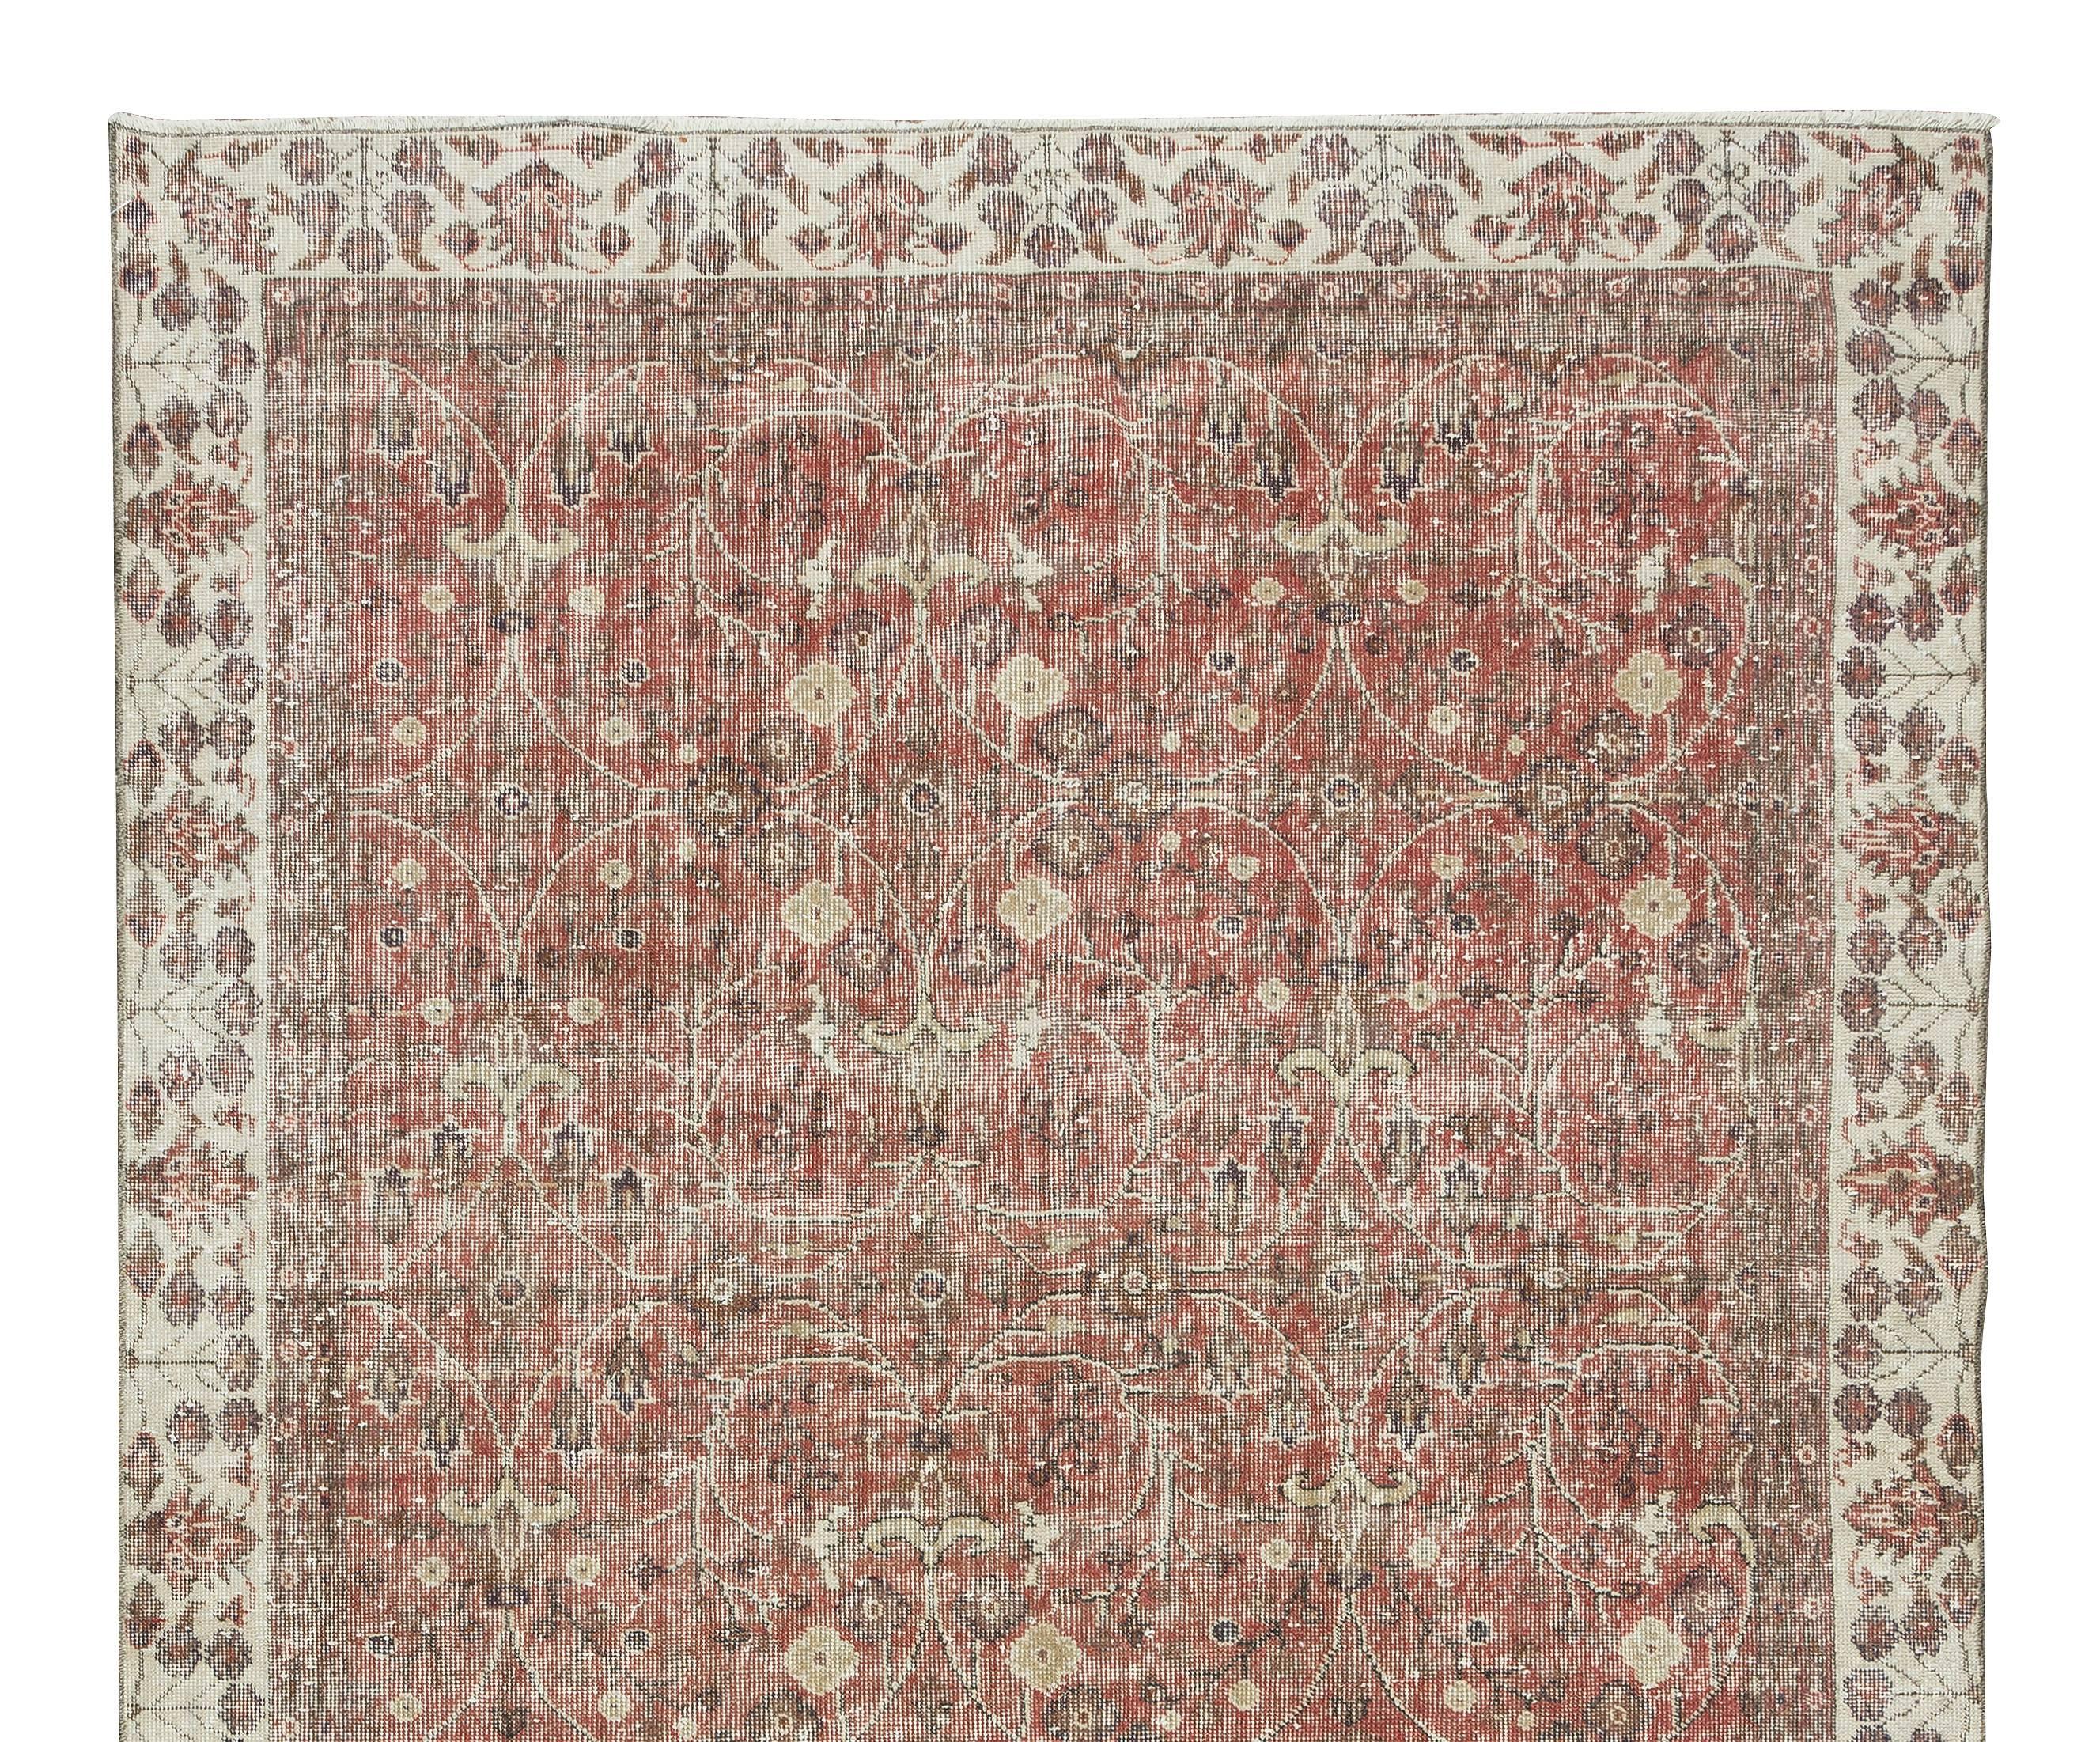 Hand-Woven 6x10 Ft Floral Pattern Floor Covering, Vintage Handmade Turkish Wool Area Rug For Sale